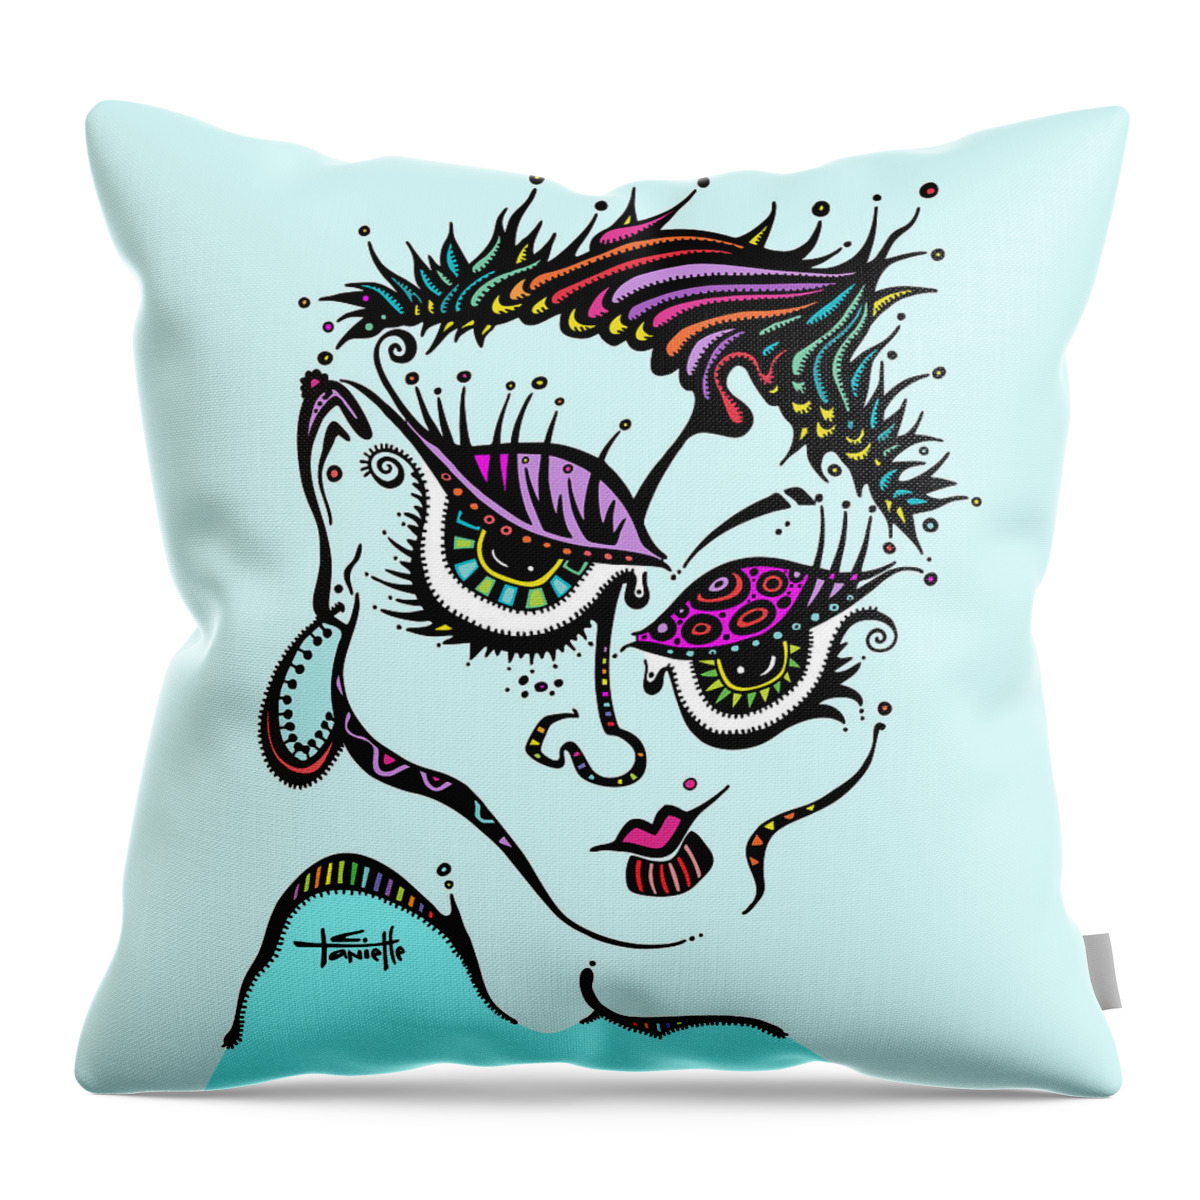 Color Added To Black And White Drawing Of Woman Throw Pillow featuring the digital art Superfly by Tanielle Childers